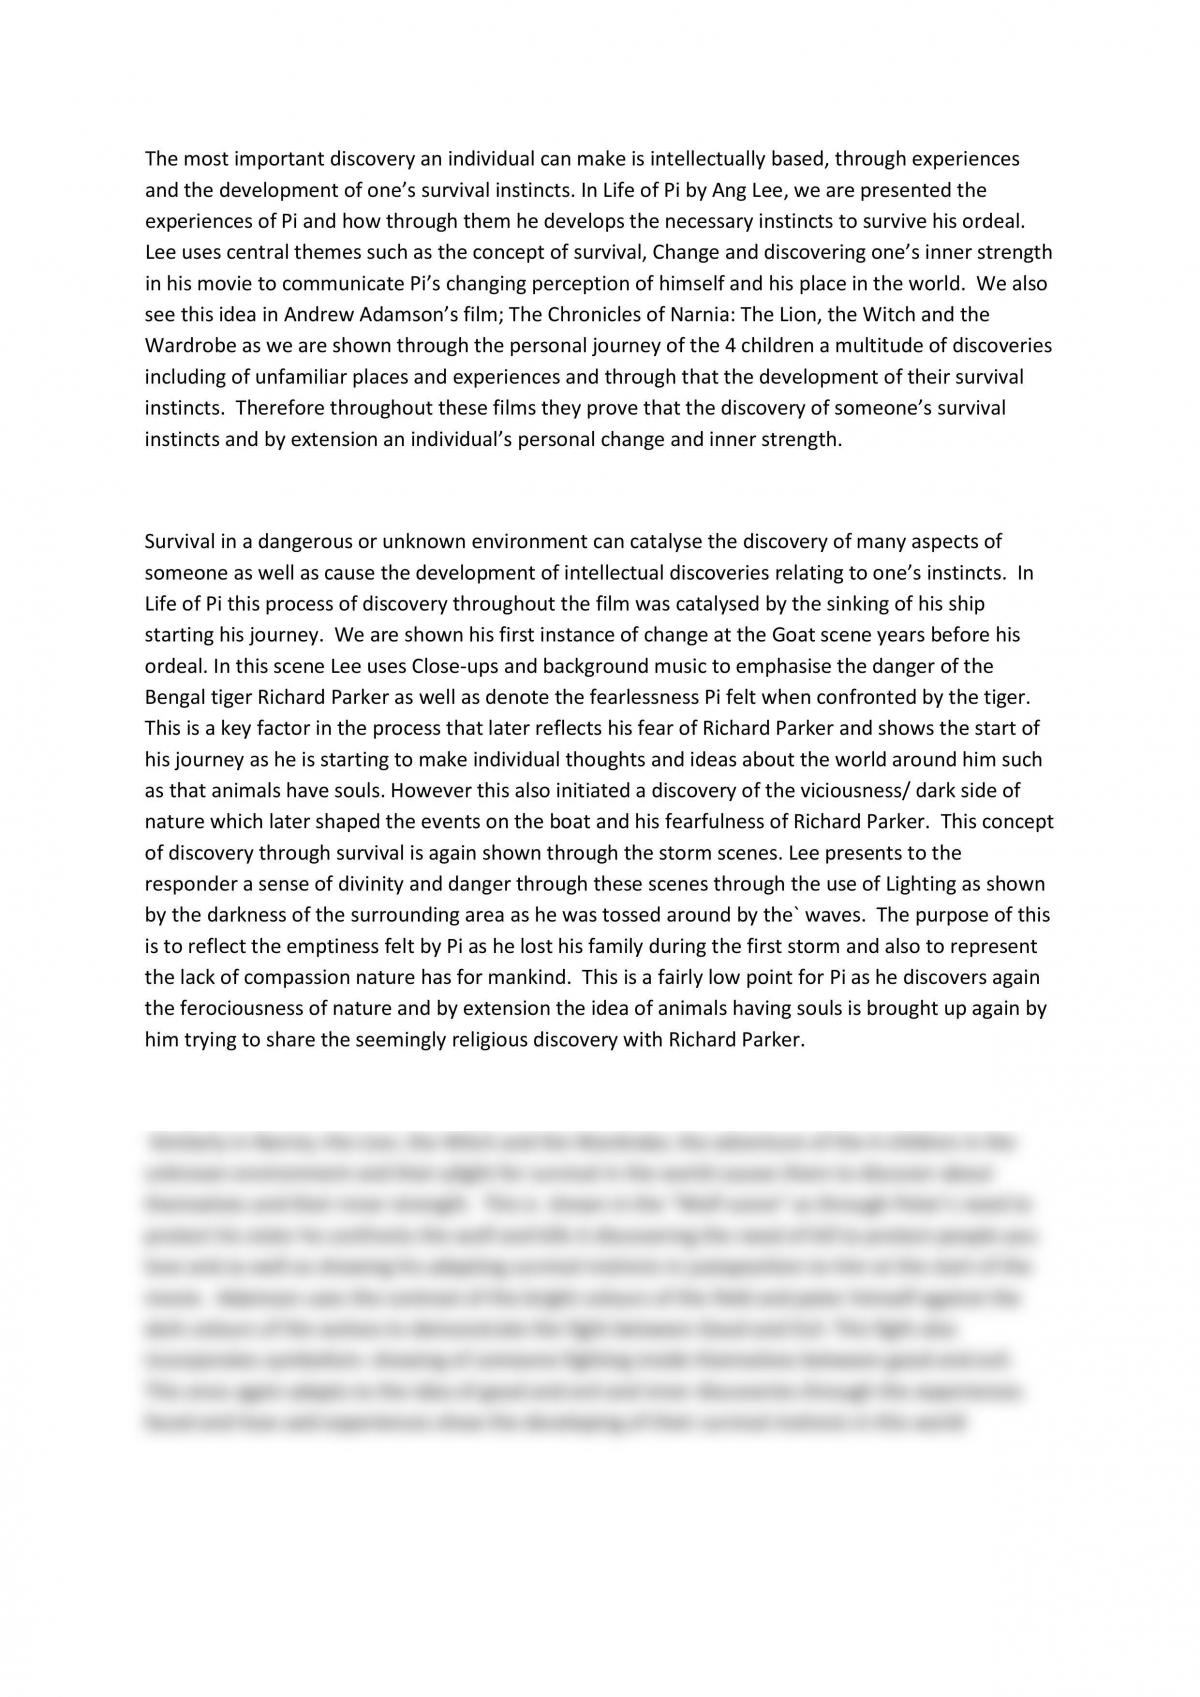 Essay on Discovery - Page 1